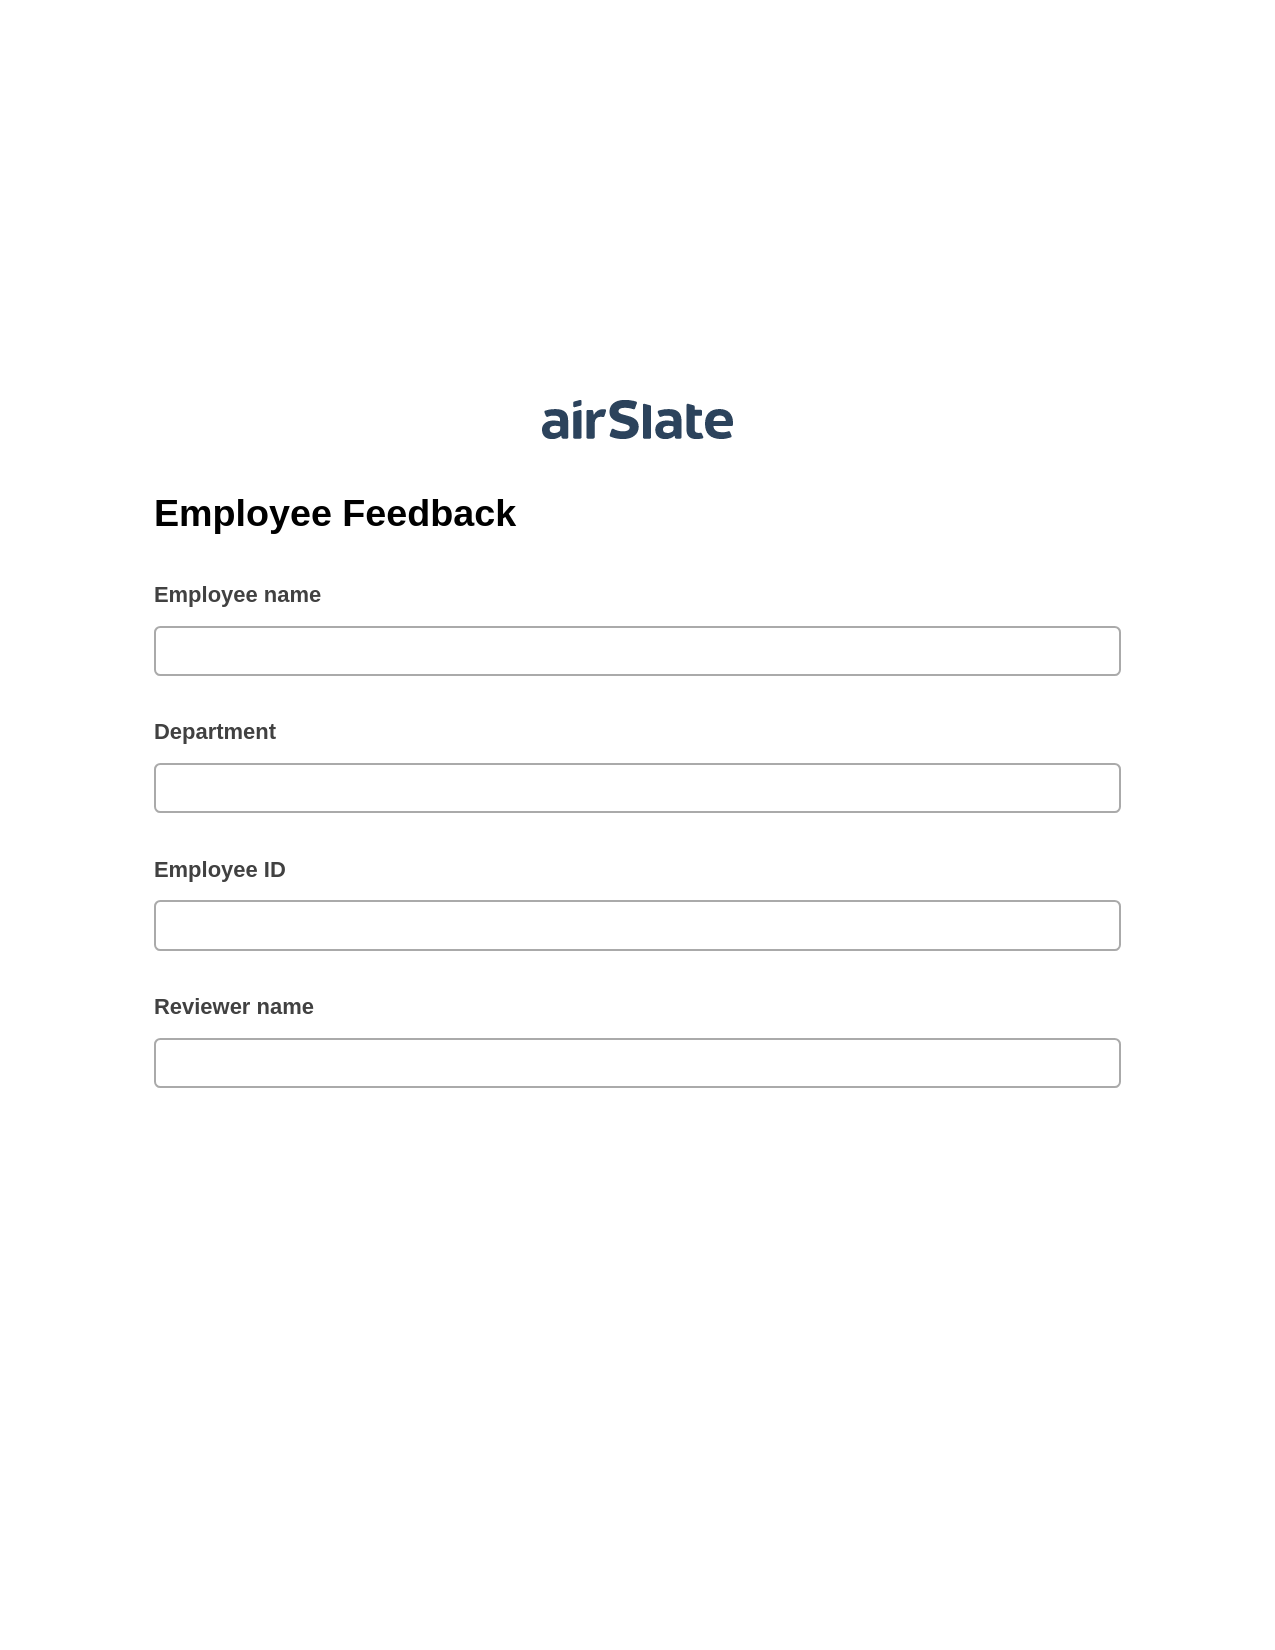 Employee Feedback Pre-fill from Google Sheet Dropdown Options Bot, Send a Slate with Roles Bot, Slack Two-Way Binding Bot